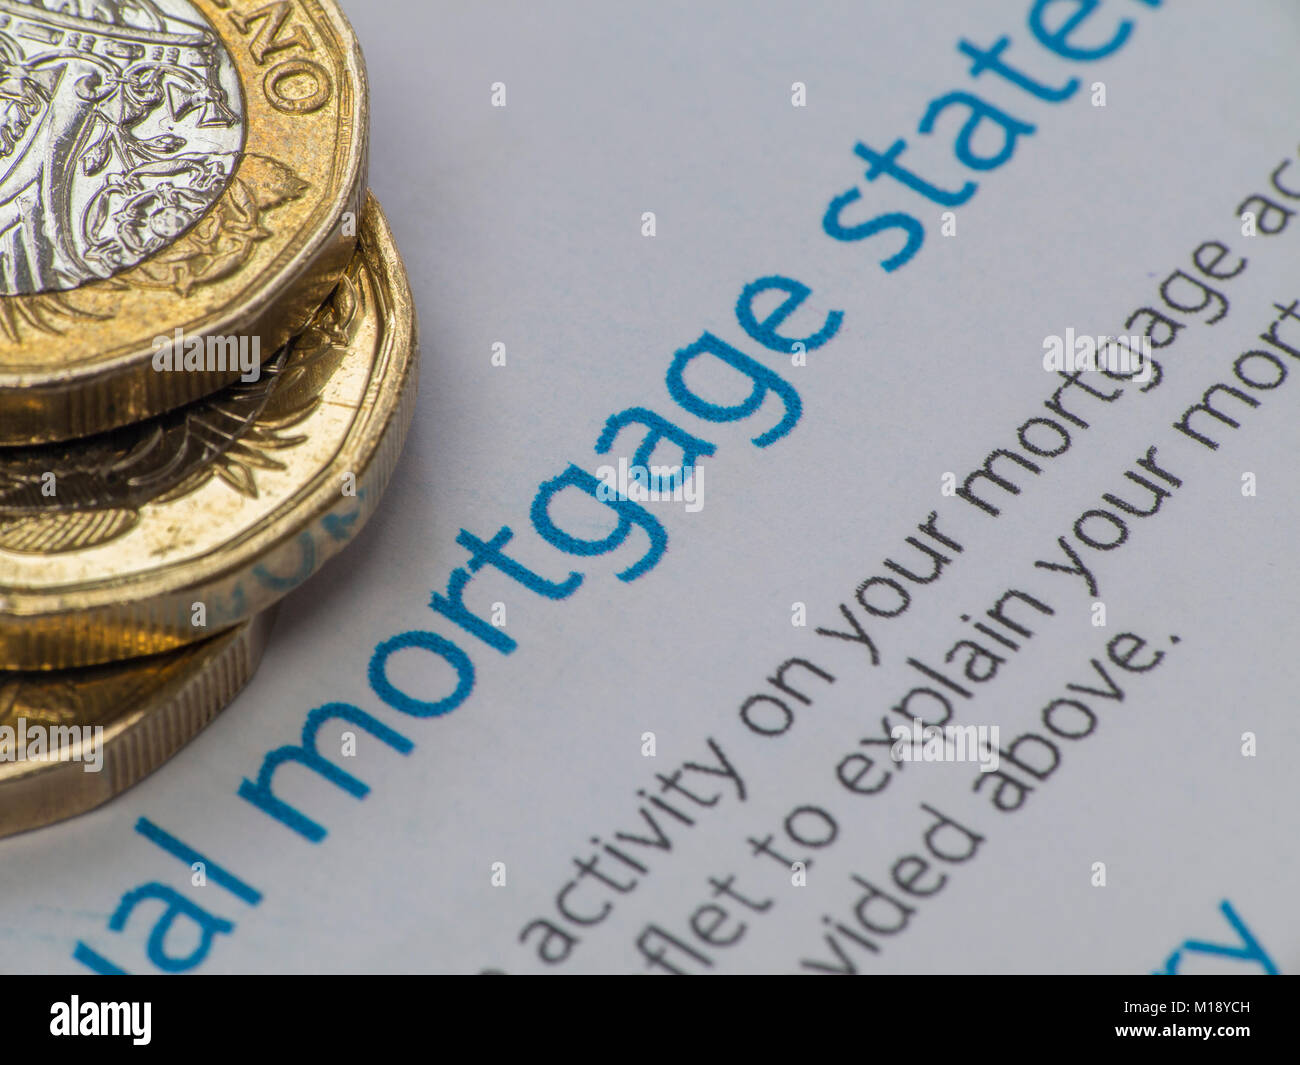 A mortgage statement with some loose change and a house key Stock Photo